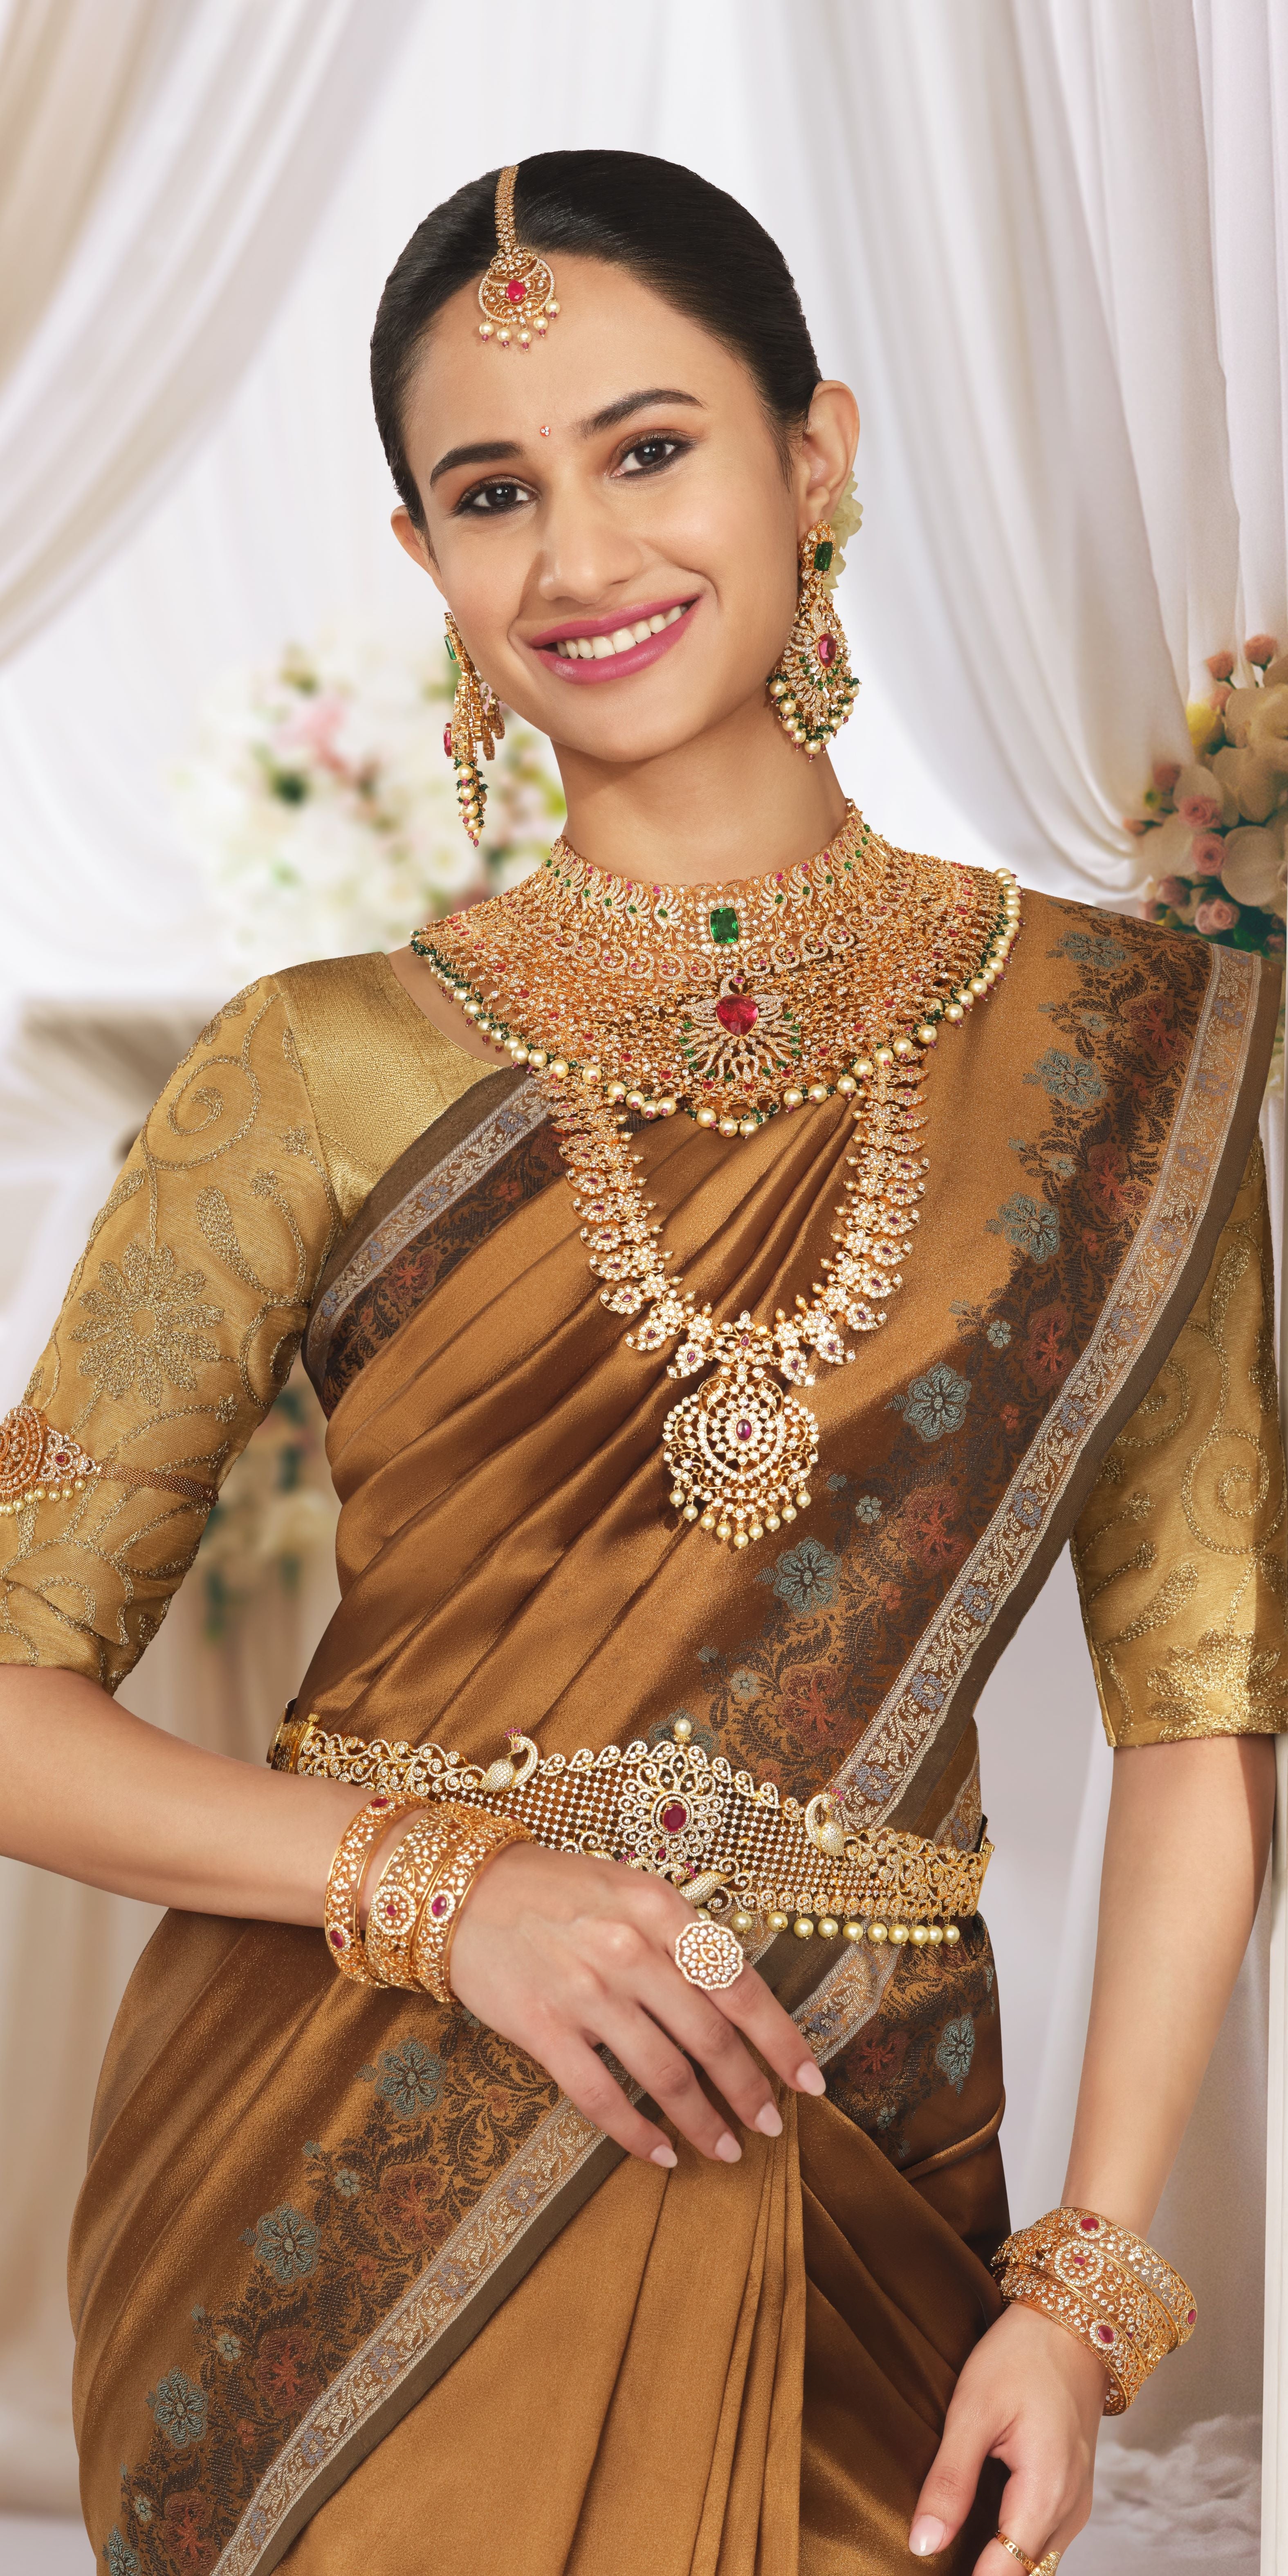 Gold Wedding Necklace Sets Online Shopping for Women at Low Prices